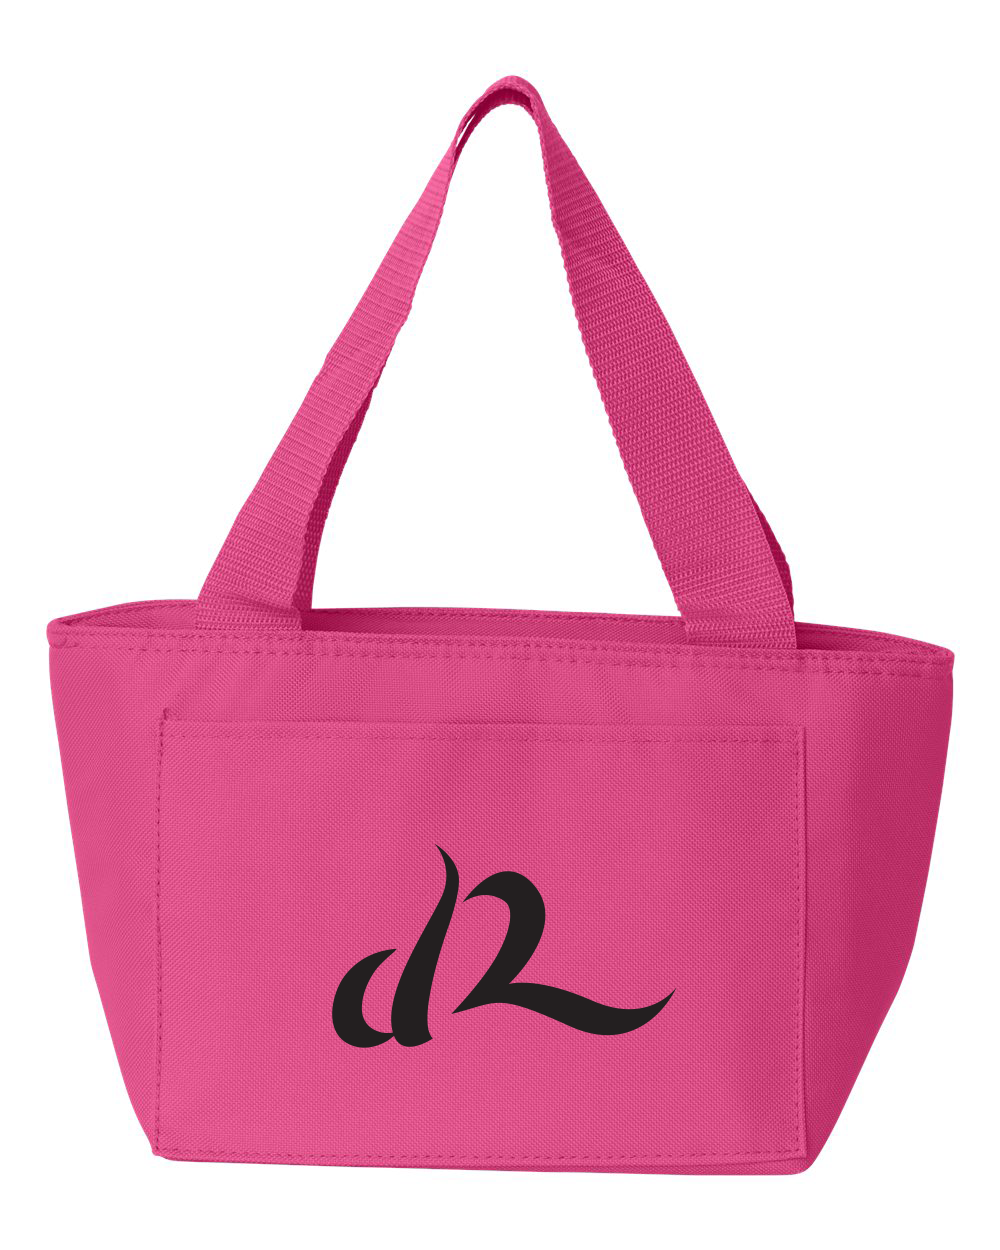 custom design of Liberty Bags 8808 - Recycled Cooler Tote